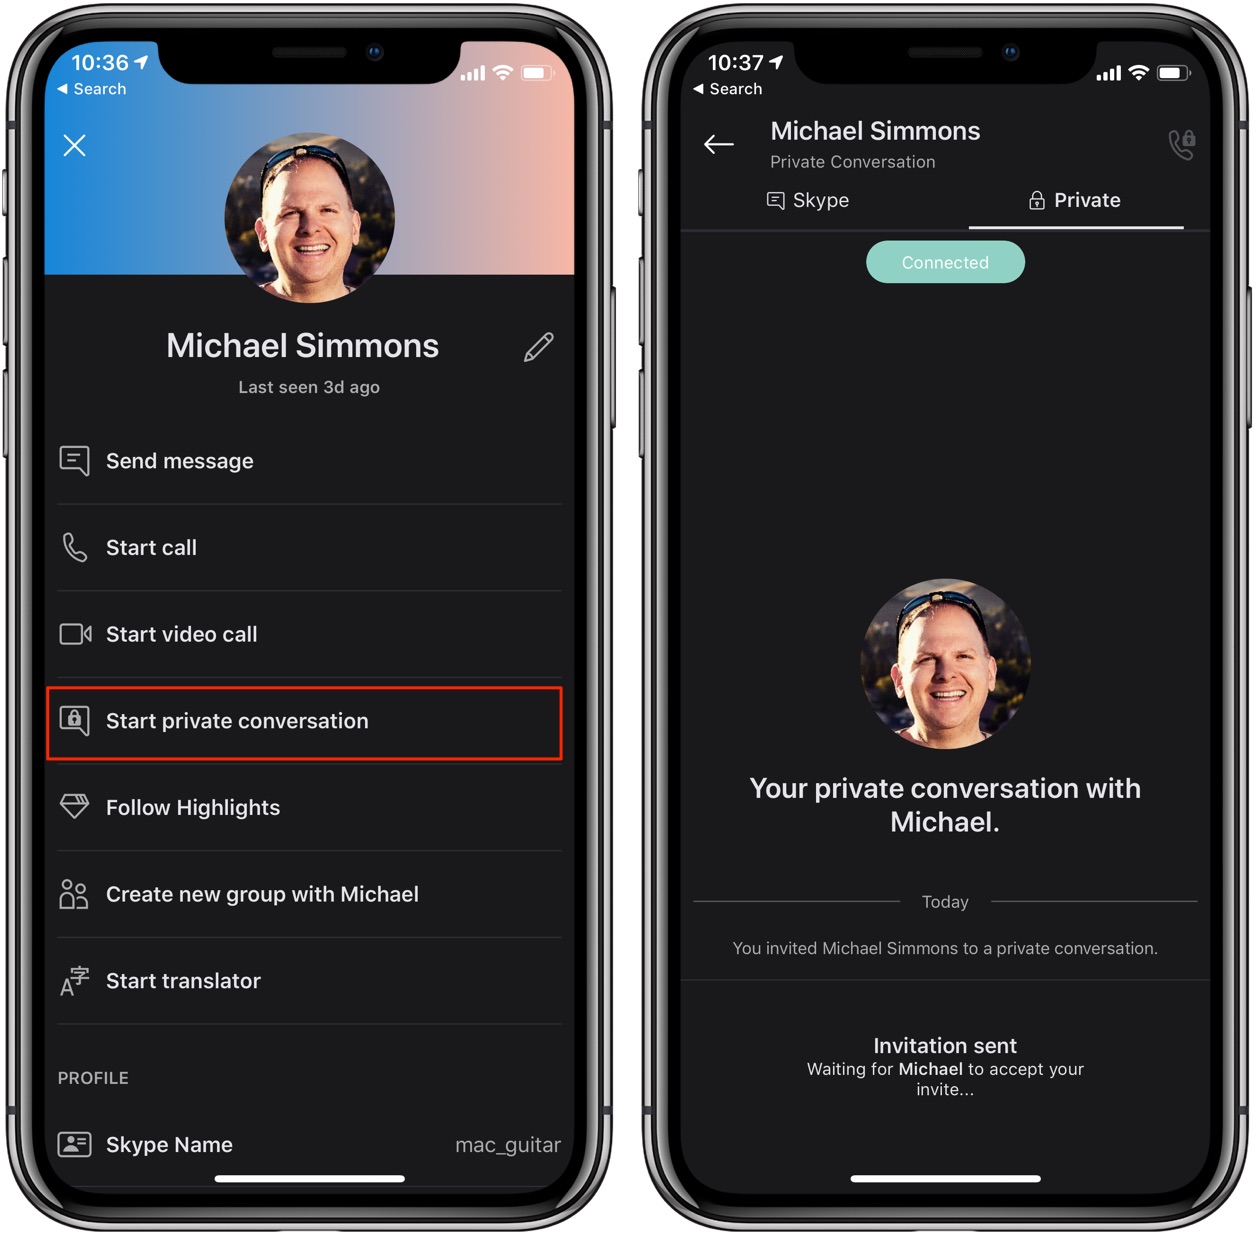 howto skype encryption start private conversation in iPhone app